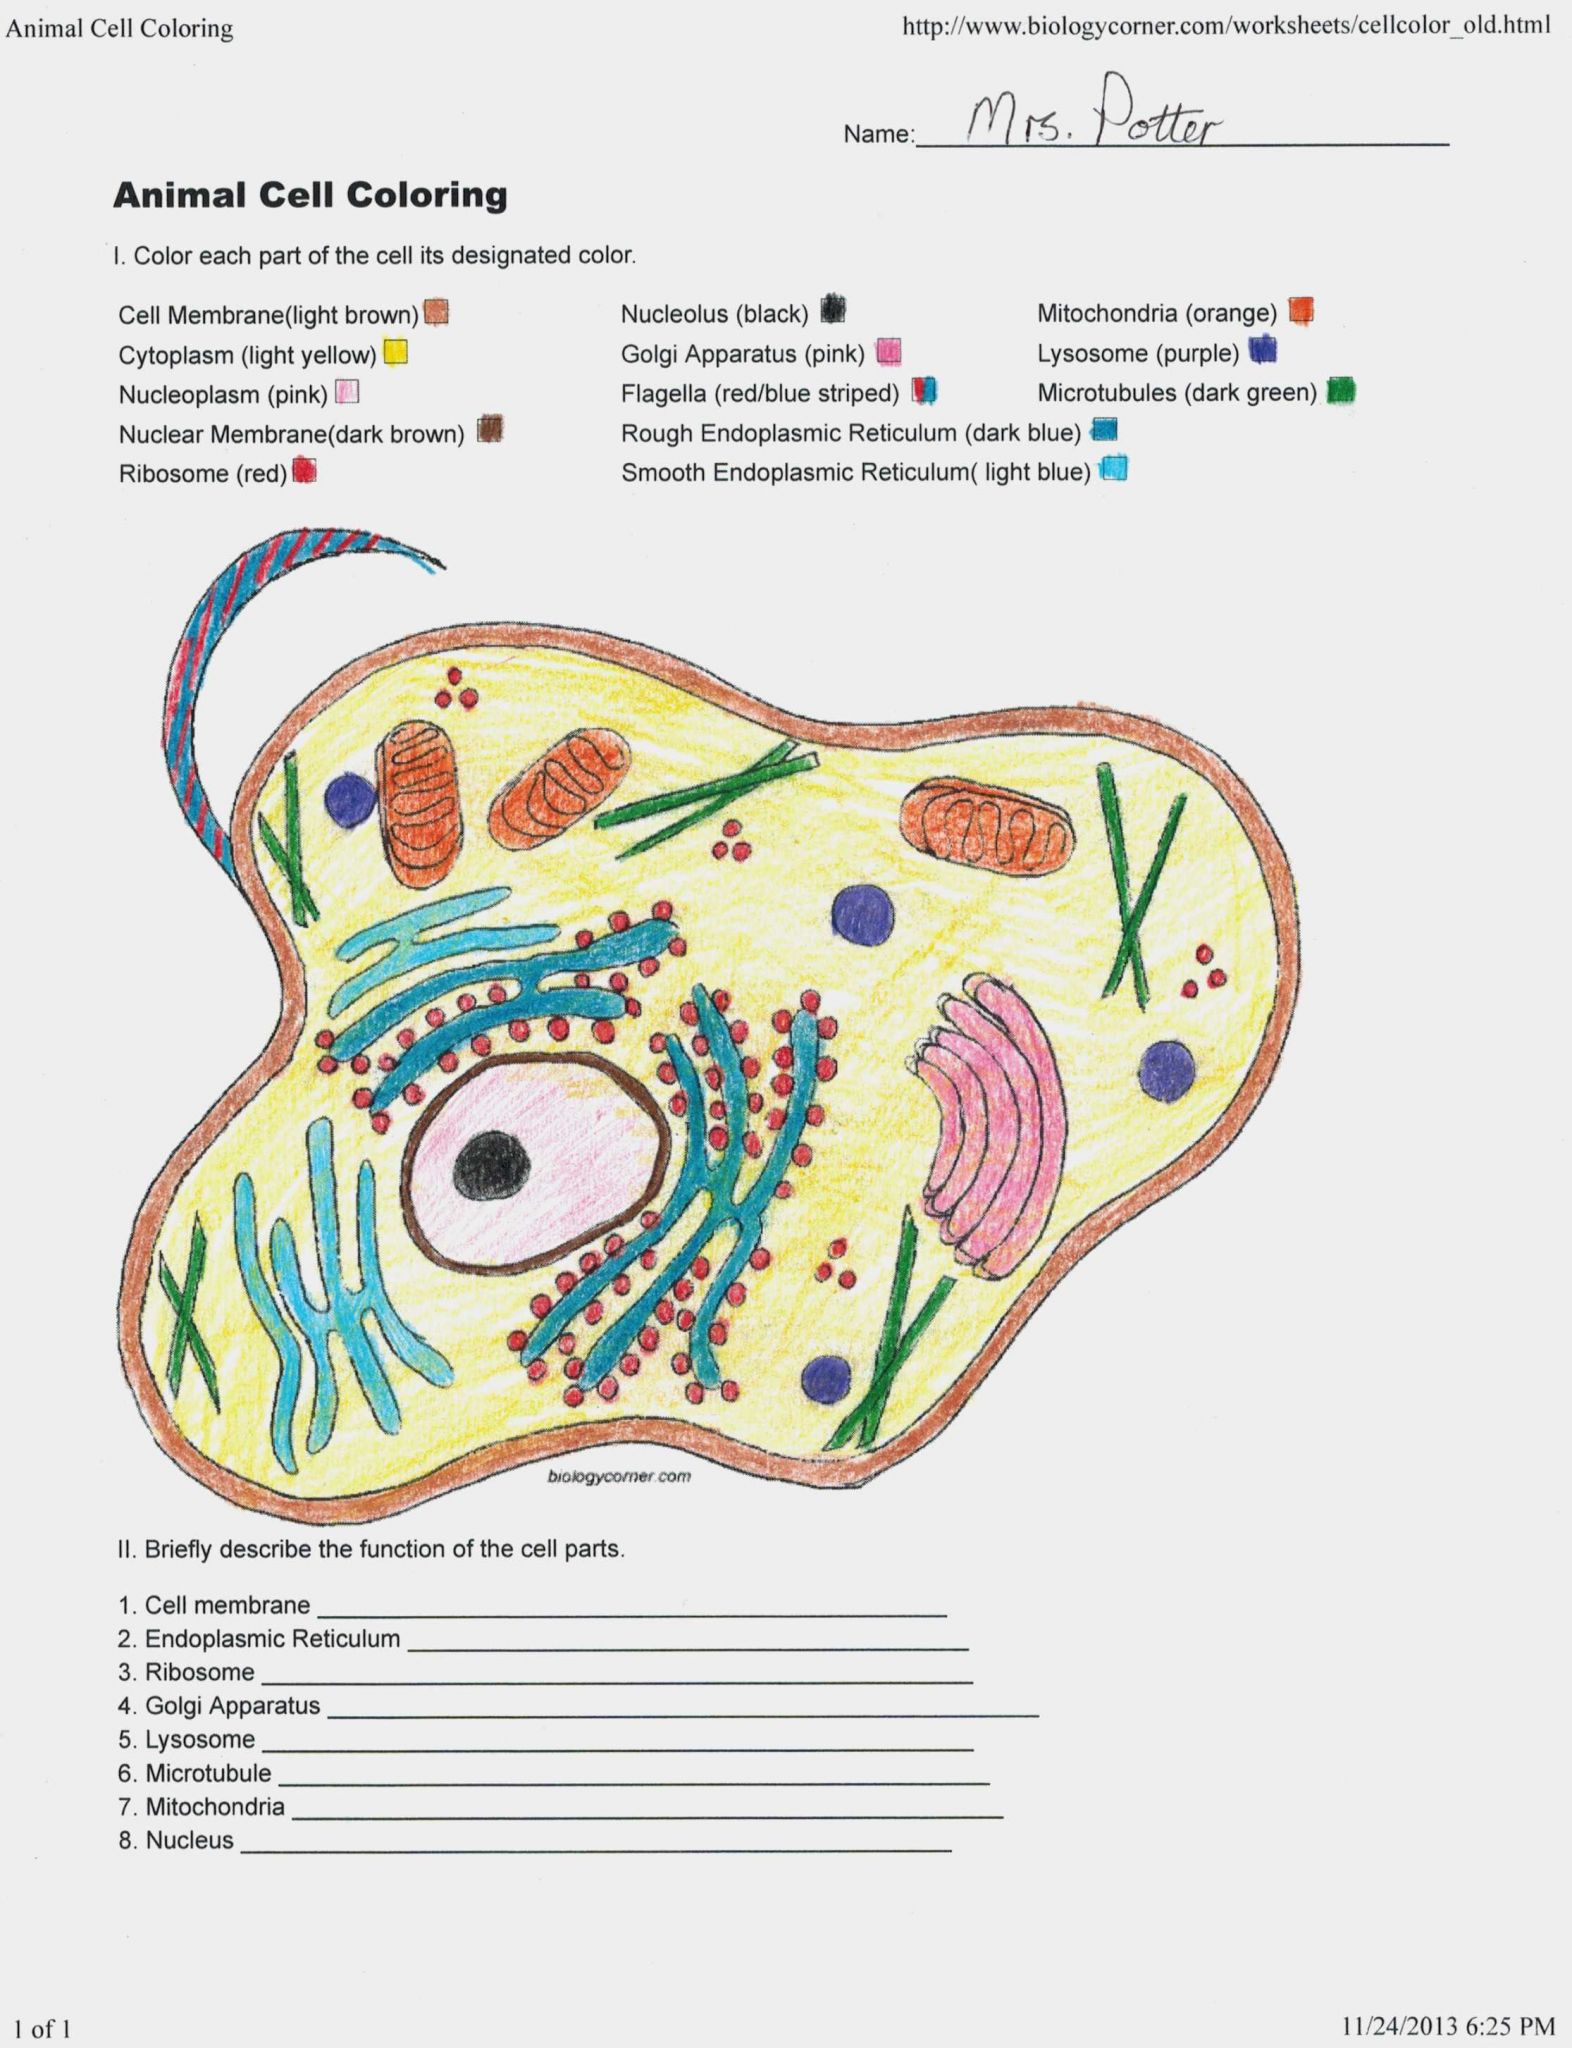 Cell Parts and Functions Worksheet Answers together with Animal Cell Coloring Labeled